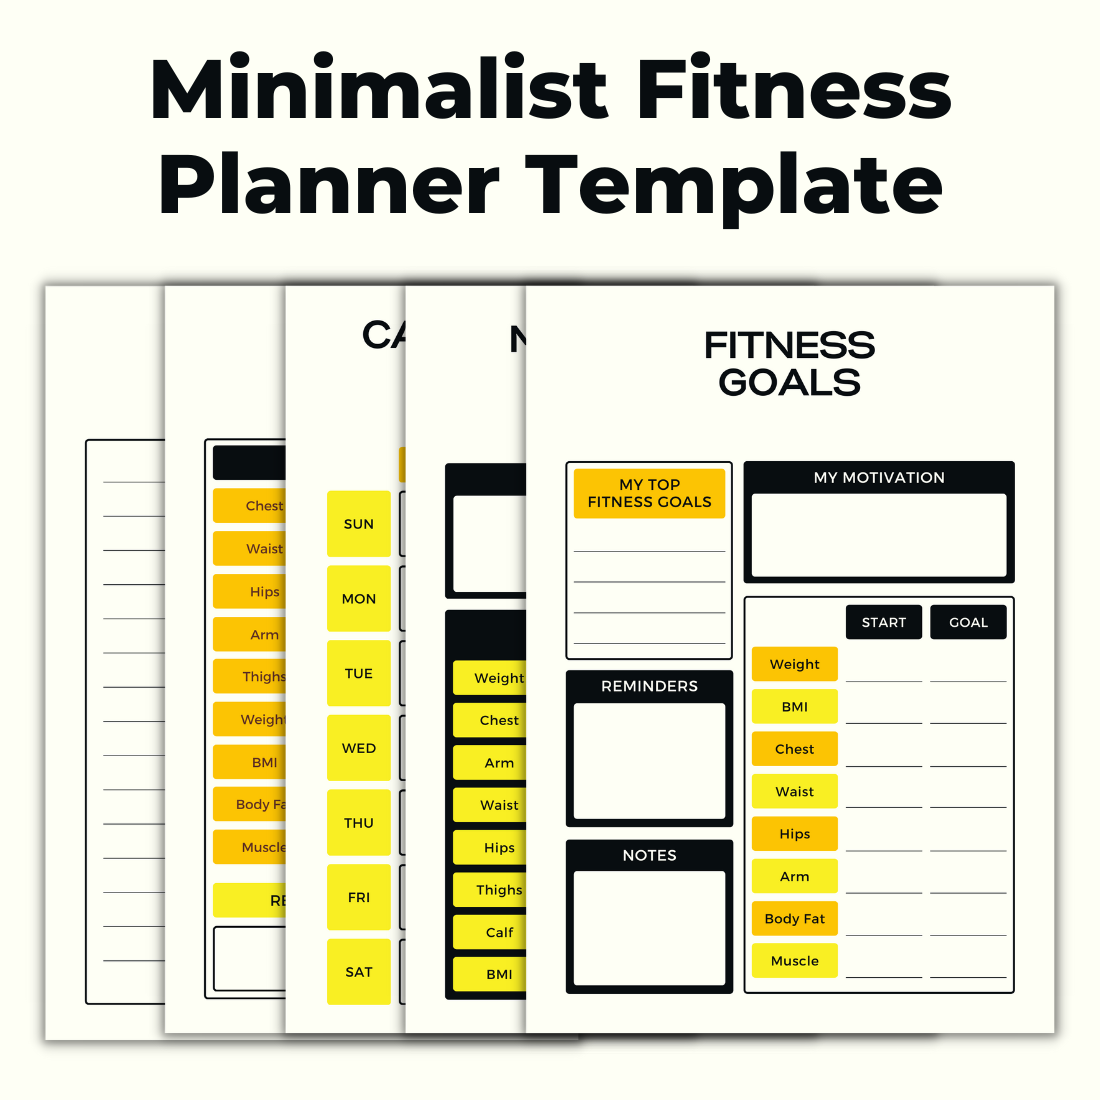 Minimalist Fitness Planner Canva Template cover image.